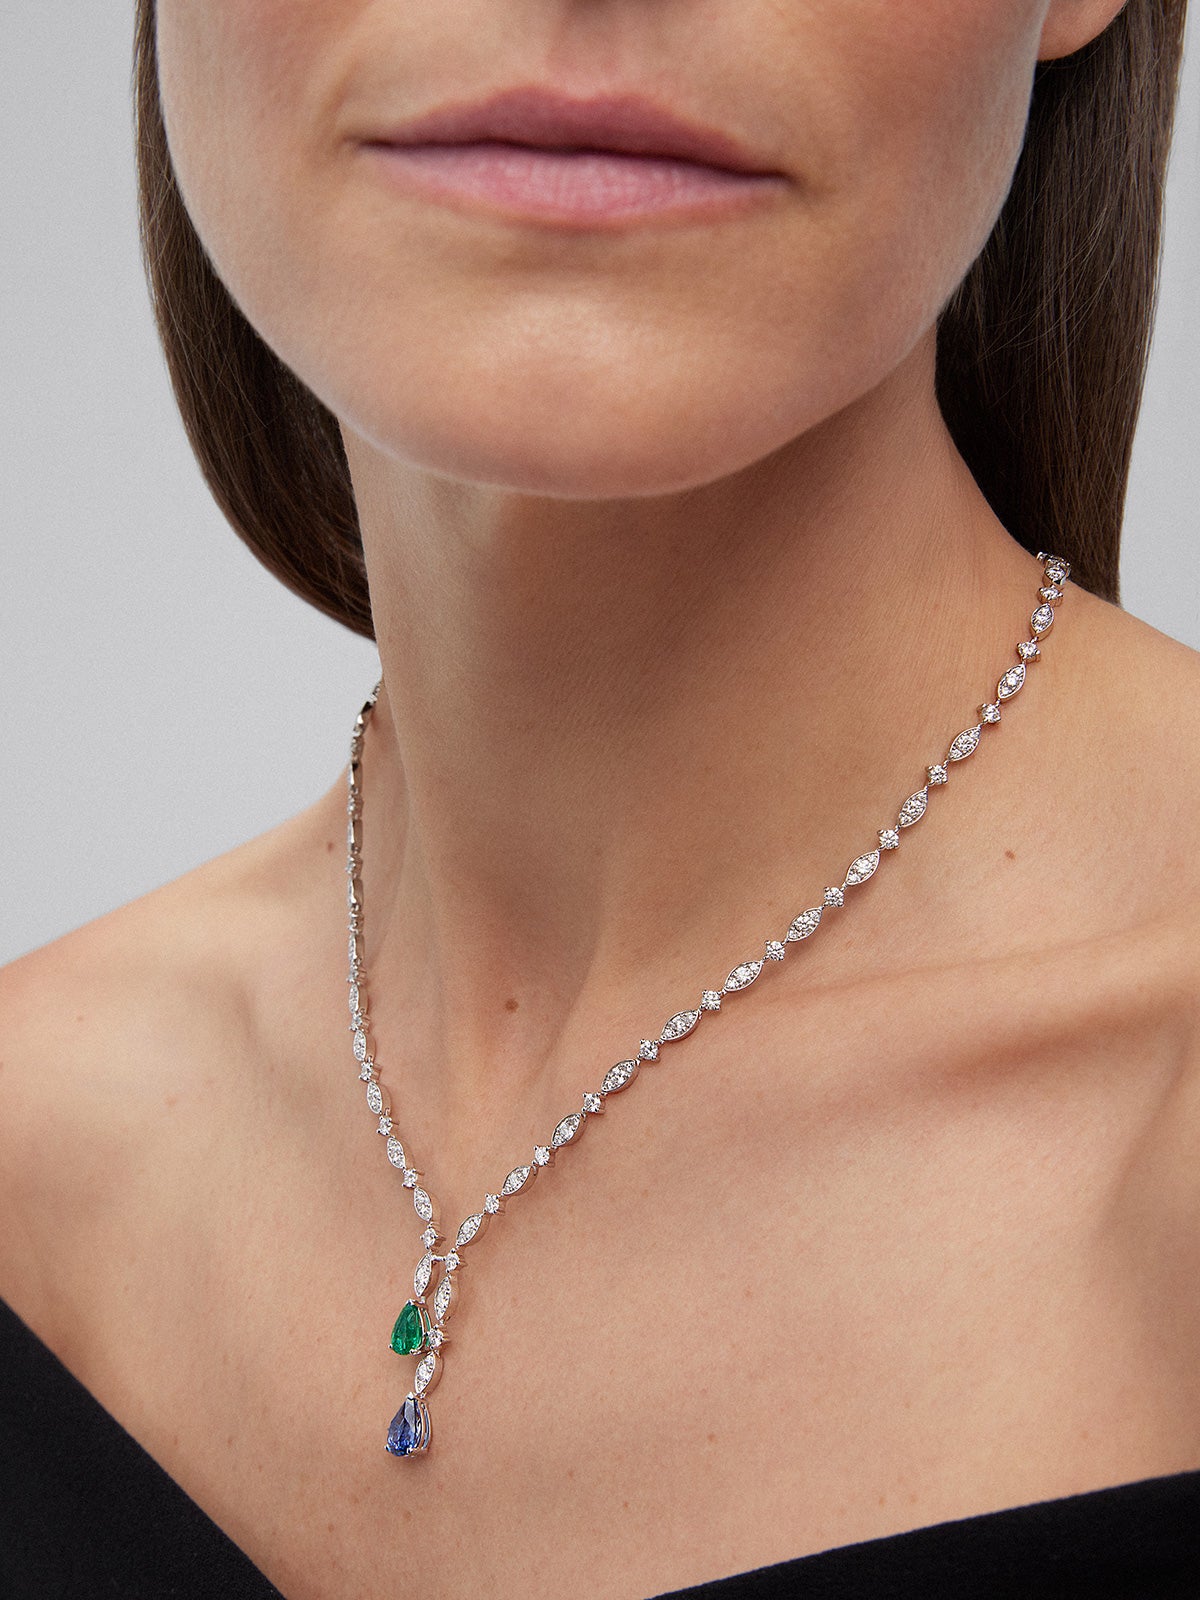 18K white gold necklace with intense blue pear-cut sapphire of 1.76 cts, pear-cut green emerald of 0.96 cts and 163 brilliant-cut diamonds with a total of 6.48 cts